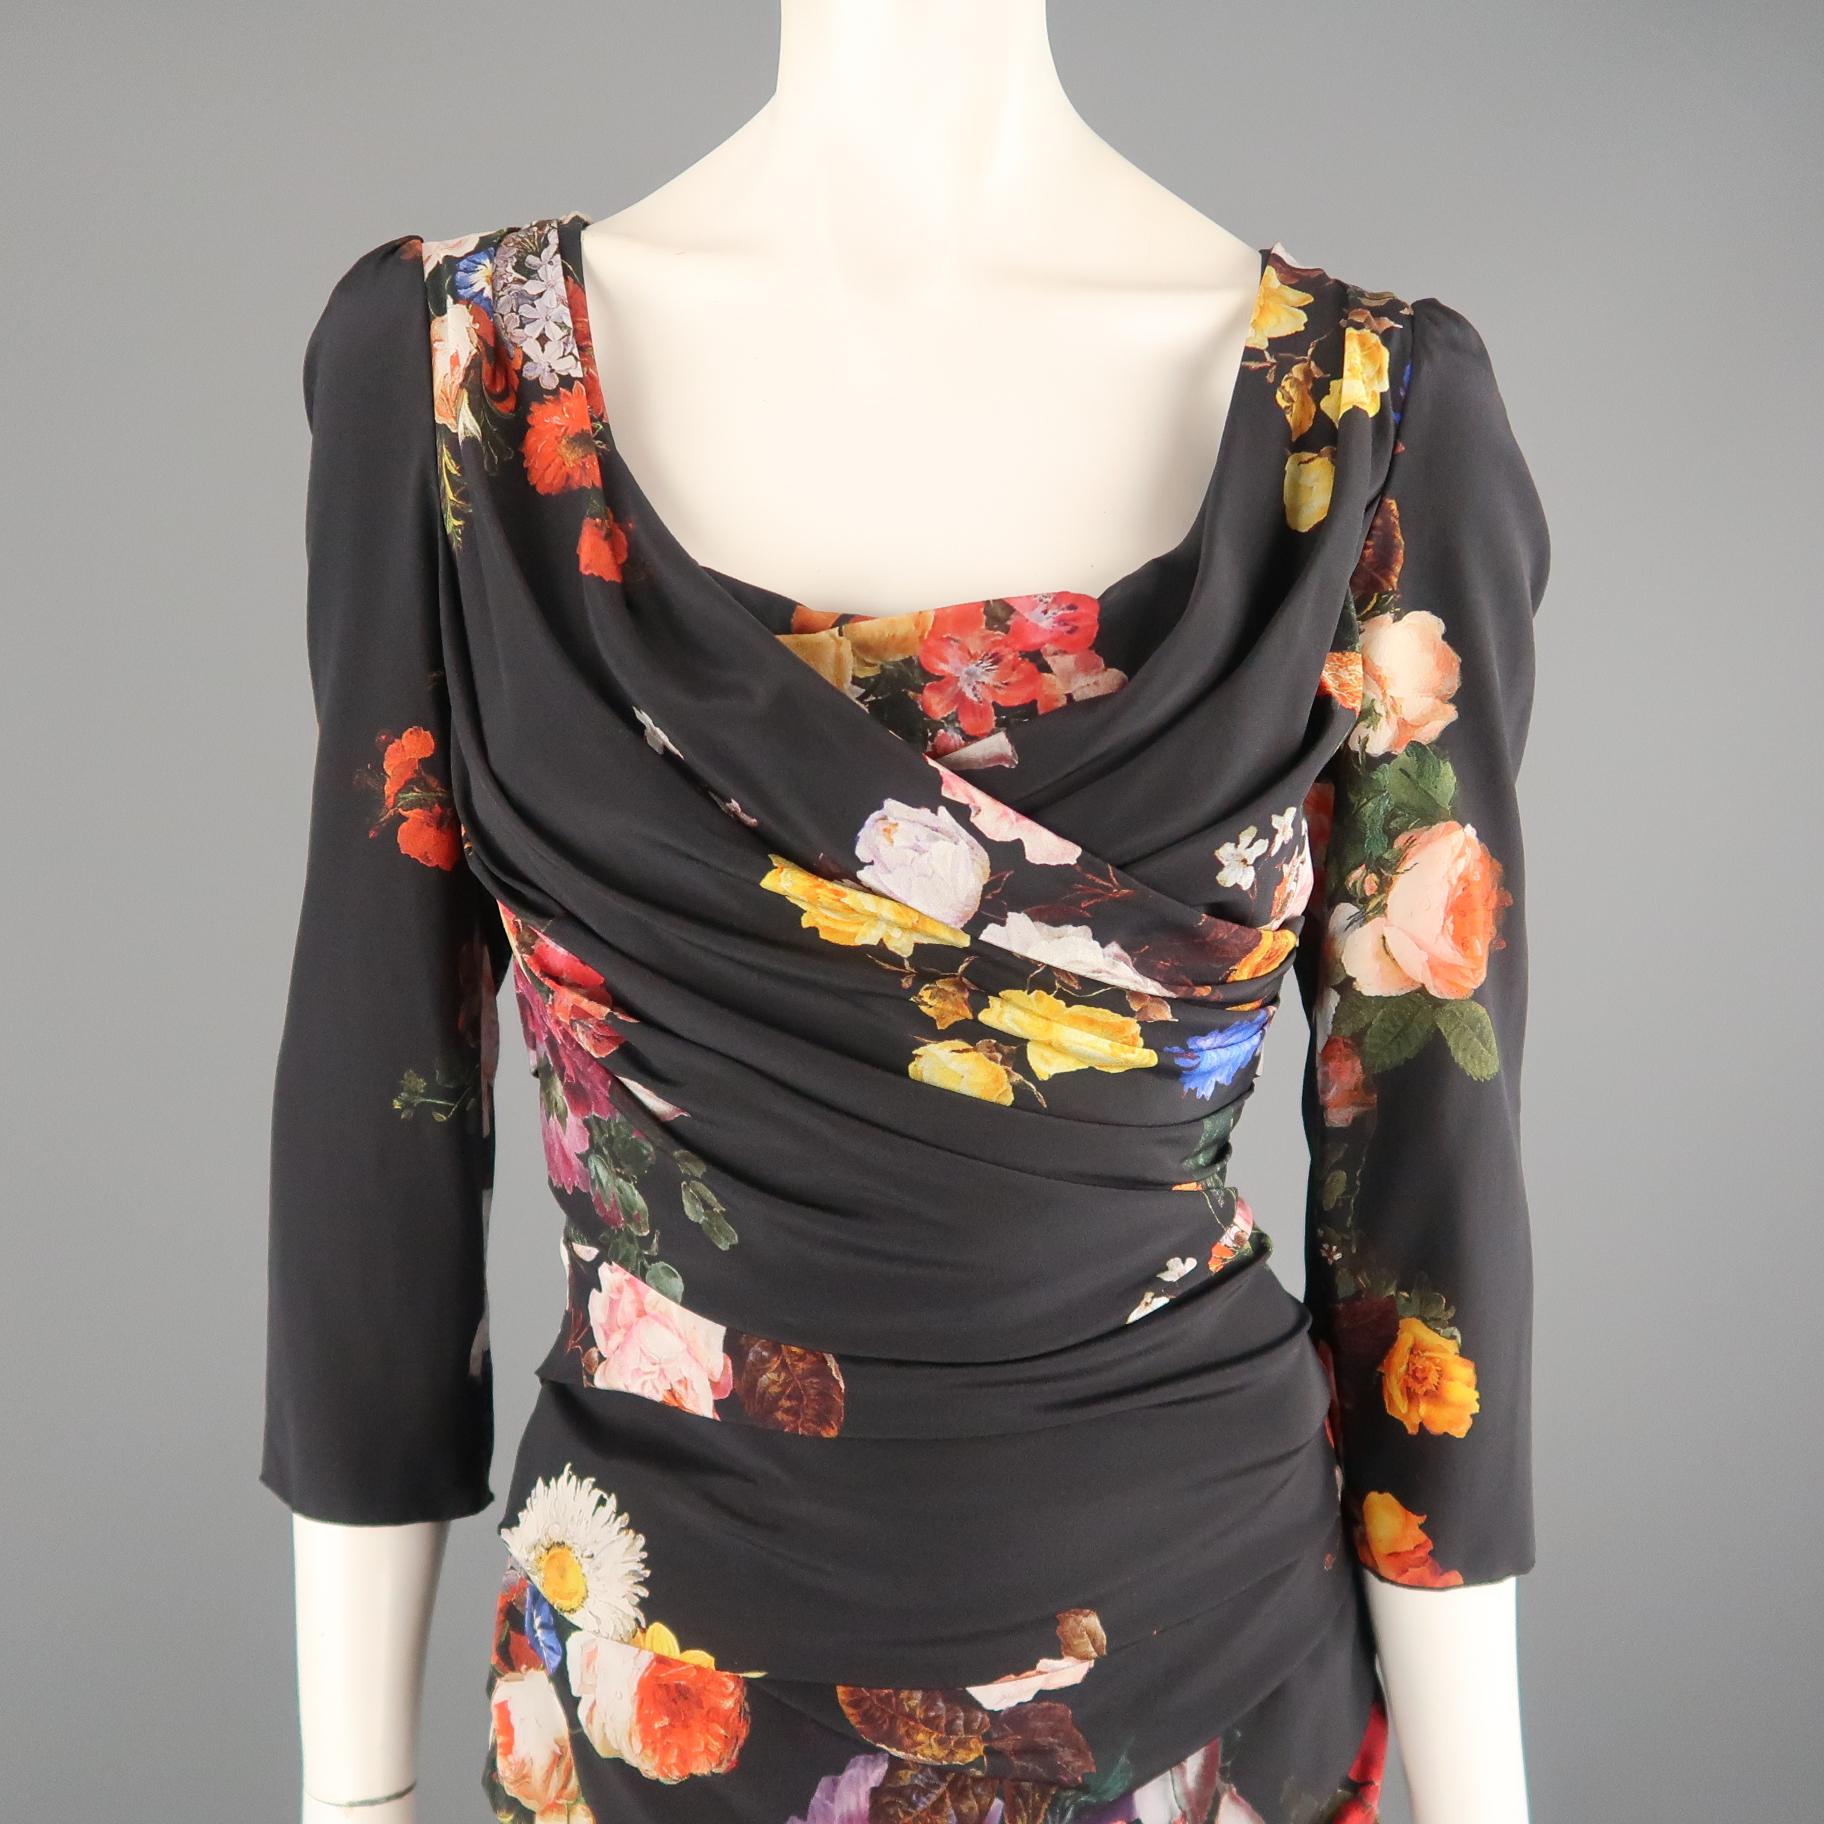 DOLCE & GABBANA sheath dress comes in black stretch silk with a multi-color floral print throughout, scoop neck, three quarter sleeves, and  drape ruching throughout.  Made in Italy.
 
New with Tags. Retails: $2,375.00.
Marked: IT 42
